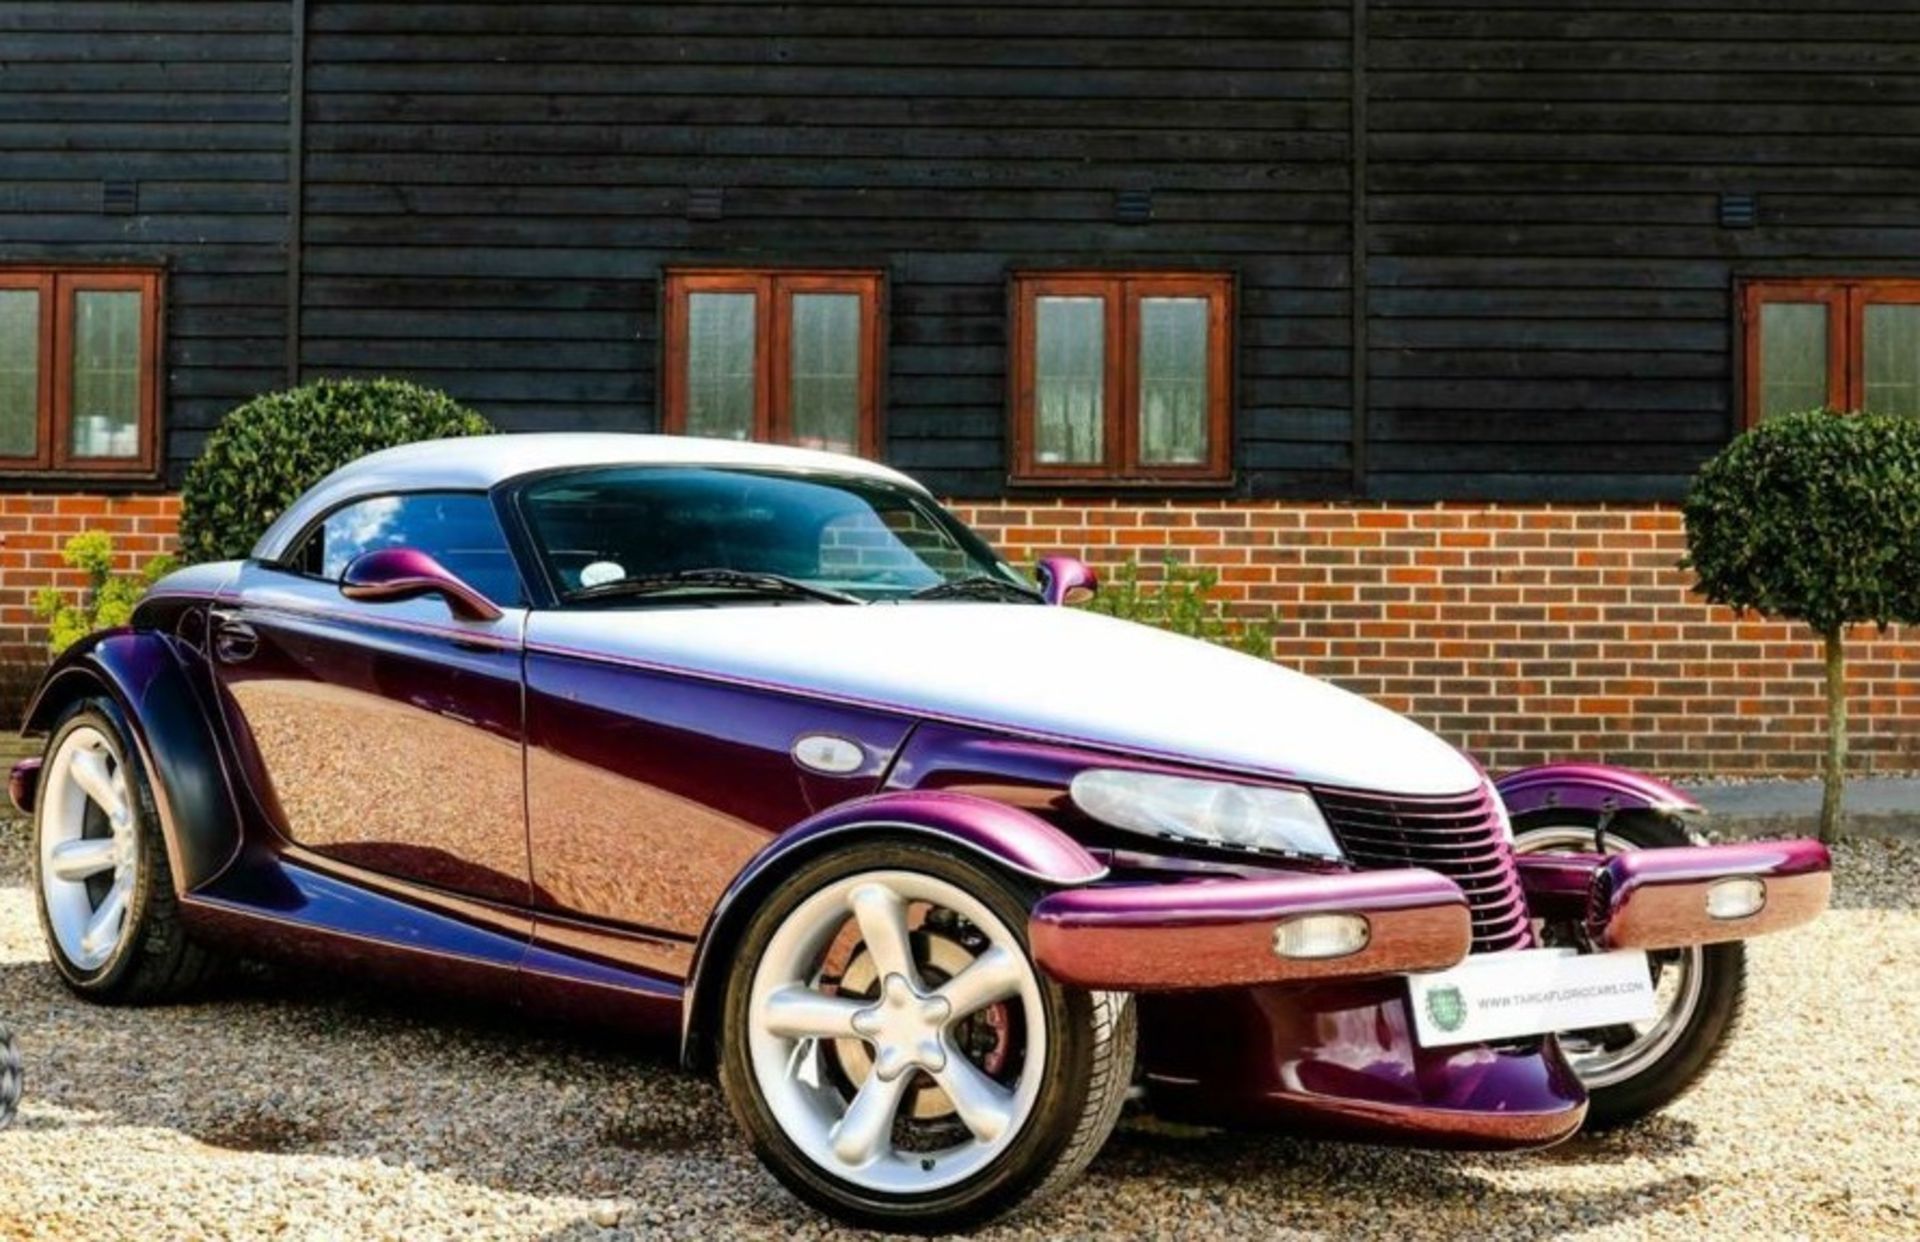 1998 CHRYSLER PLYMOUTH PROWLER V6 2 DOOR CONVERTIBLE, 3500cc PETROL ENGINE, AUTO *NO VAT* - Image 14 of 32